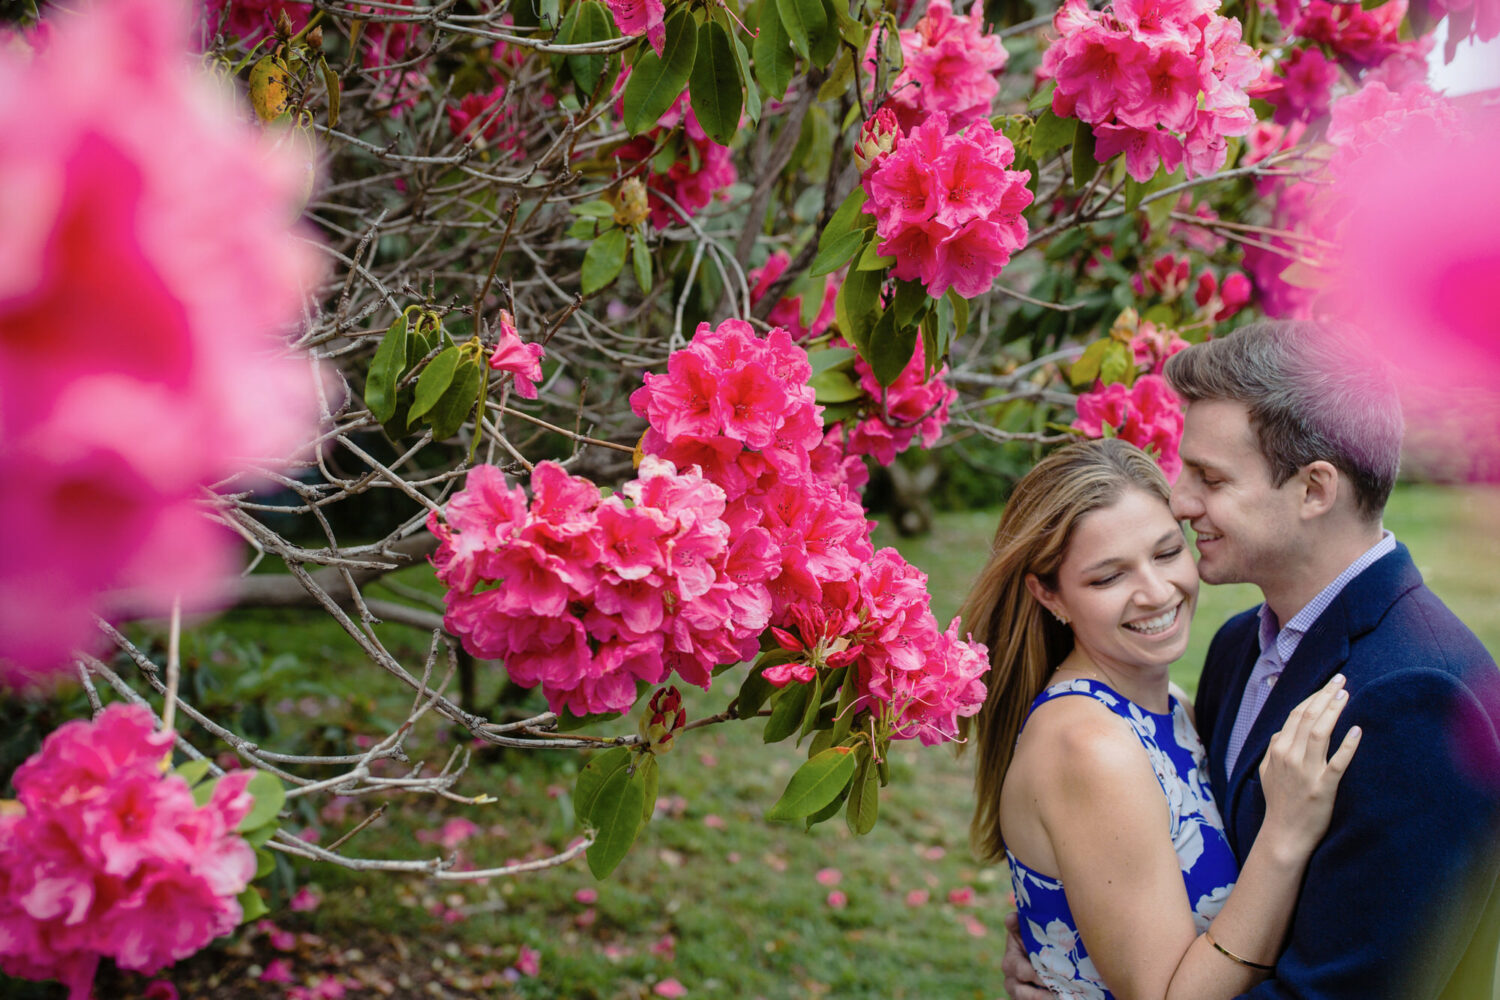 Engagement photoshoot with Rhododendron flowers.